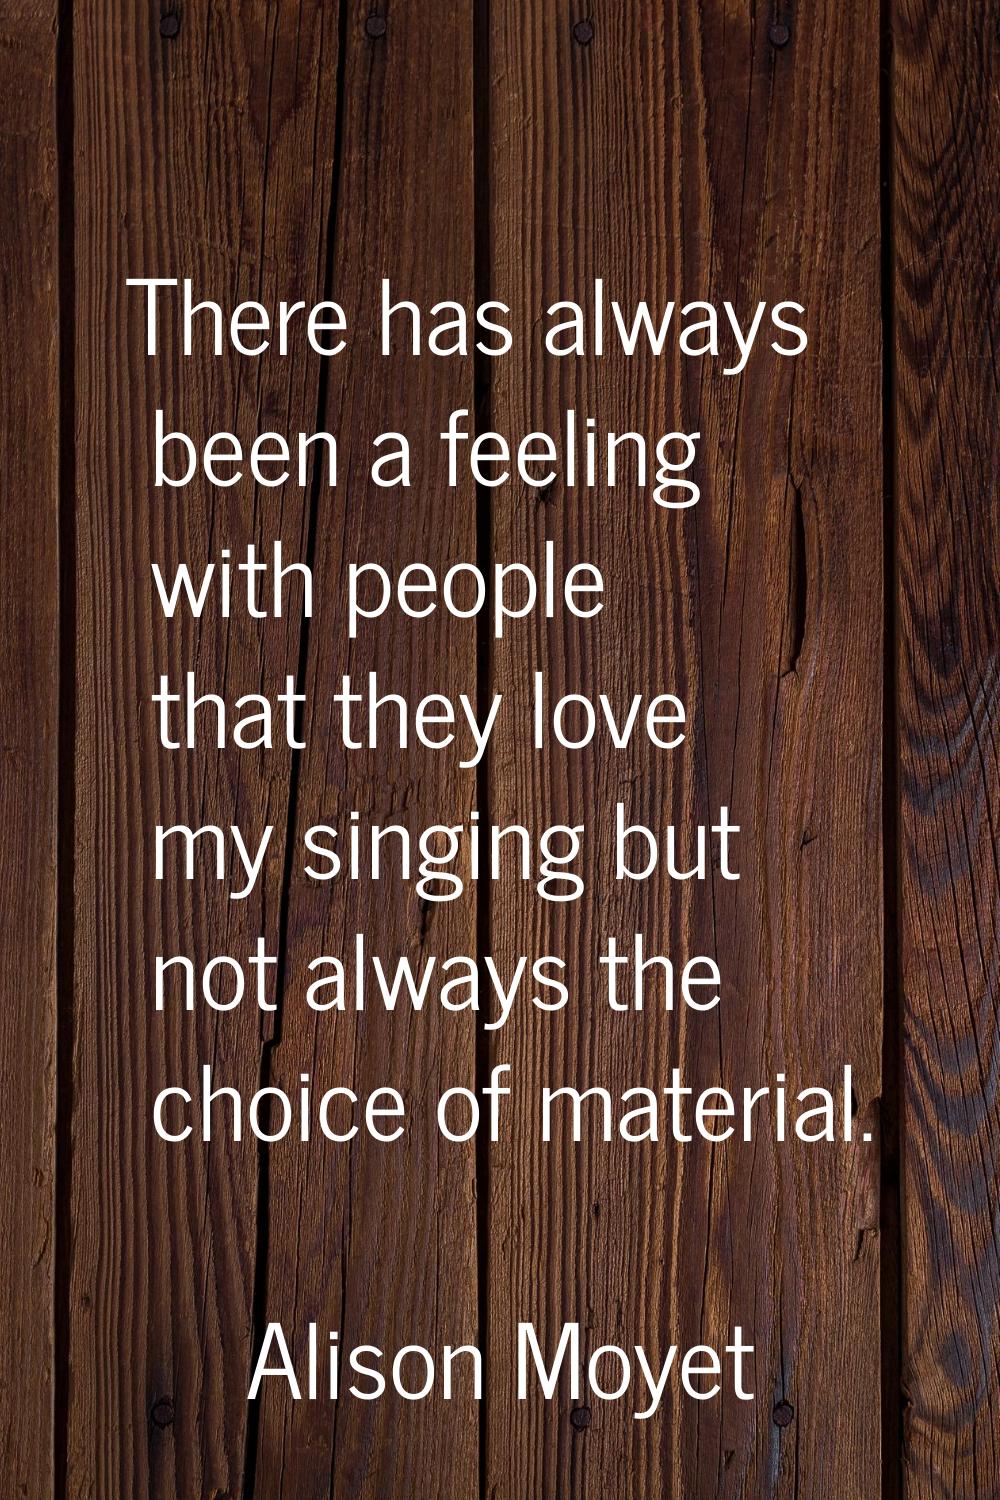 There has always been a feeling with people that they love my singing but not always the choice of 